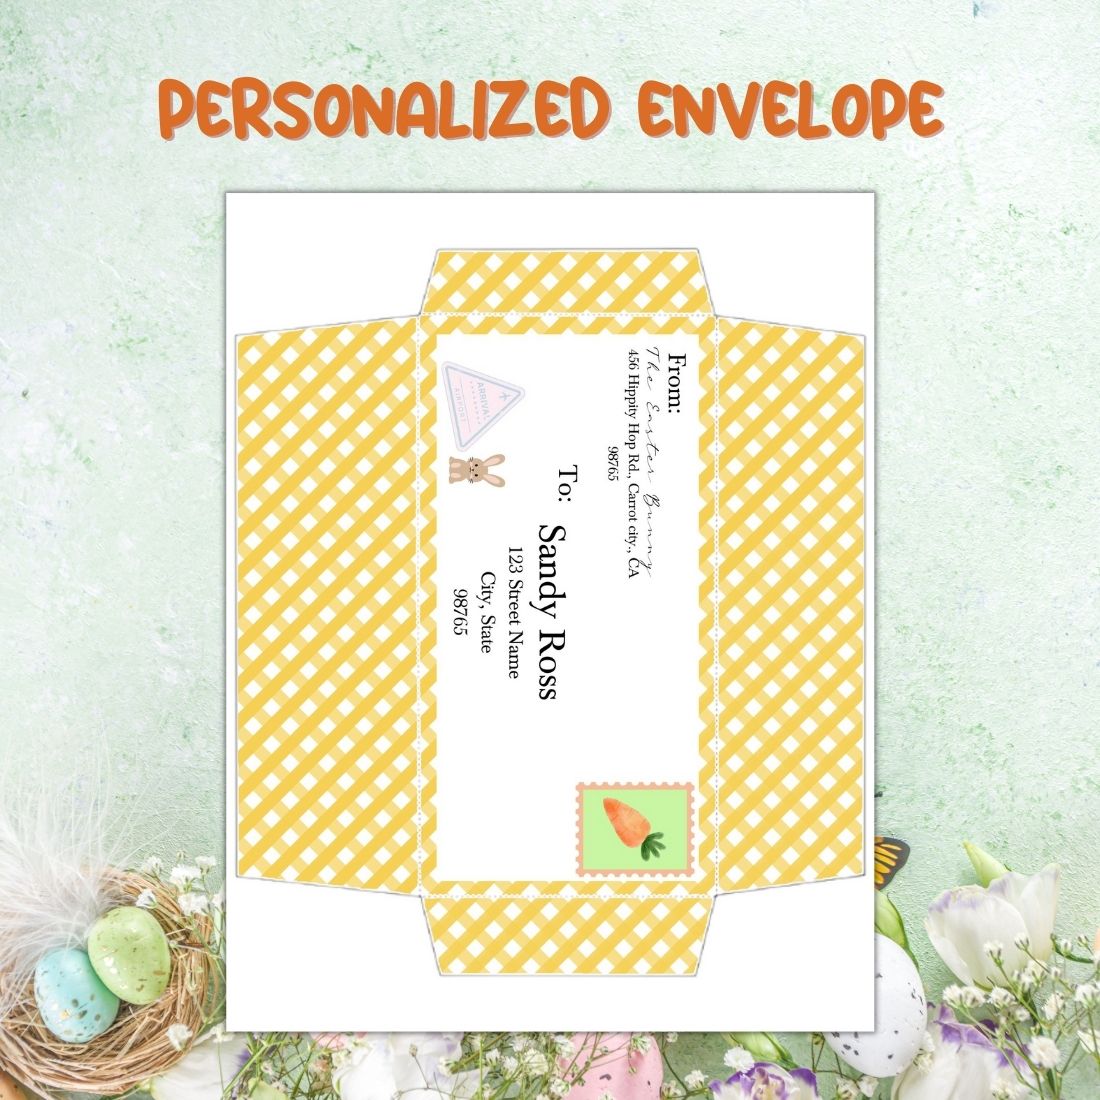 Yellow and white checkered envelope with a bird on it.